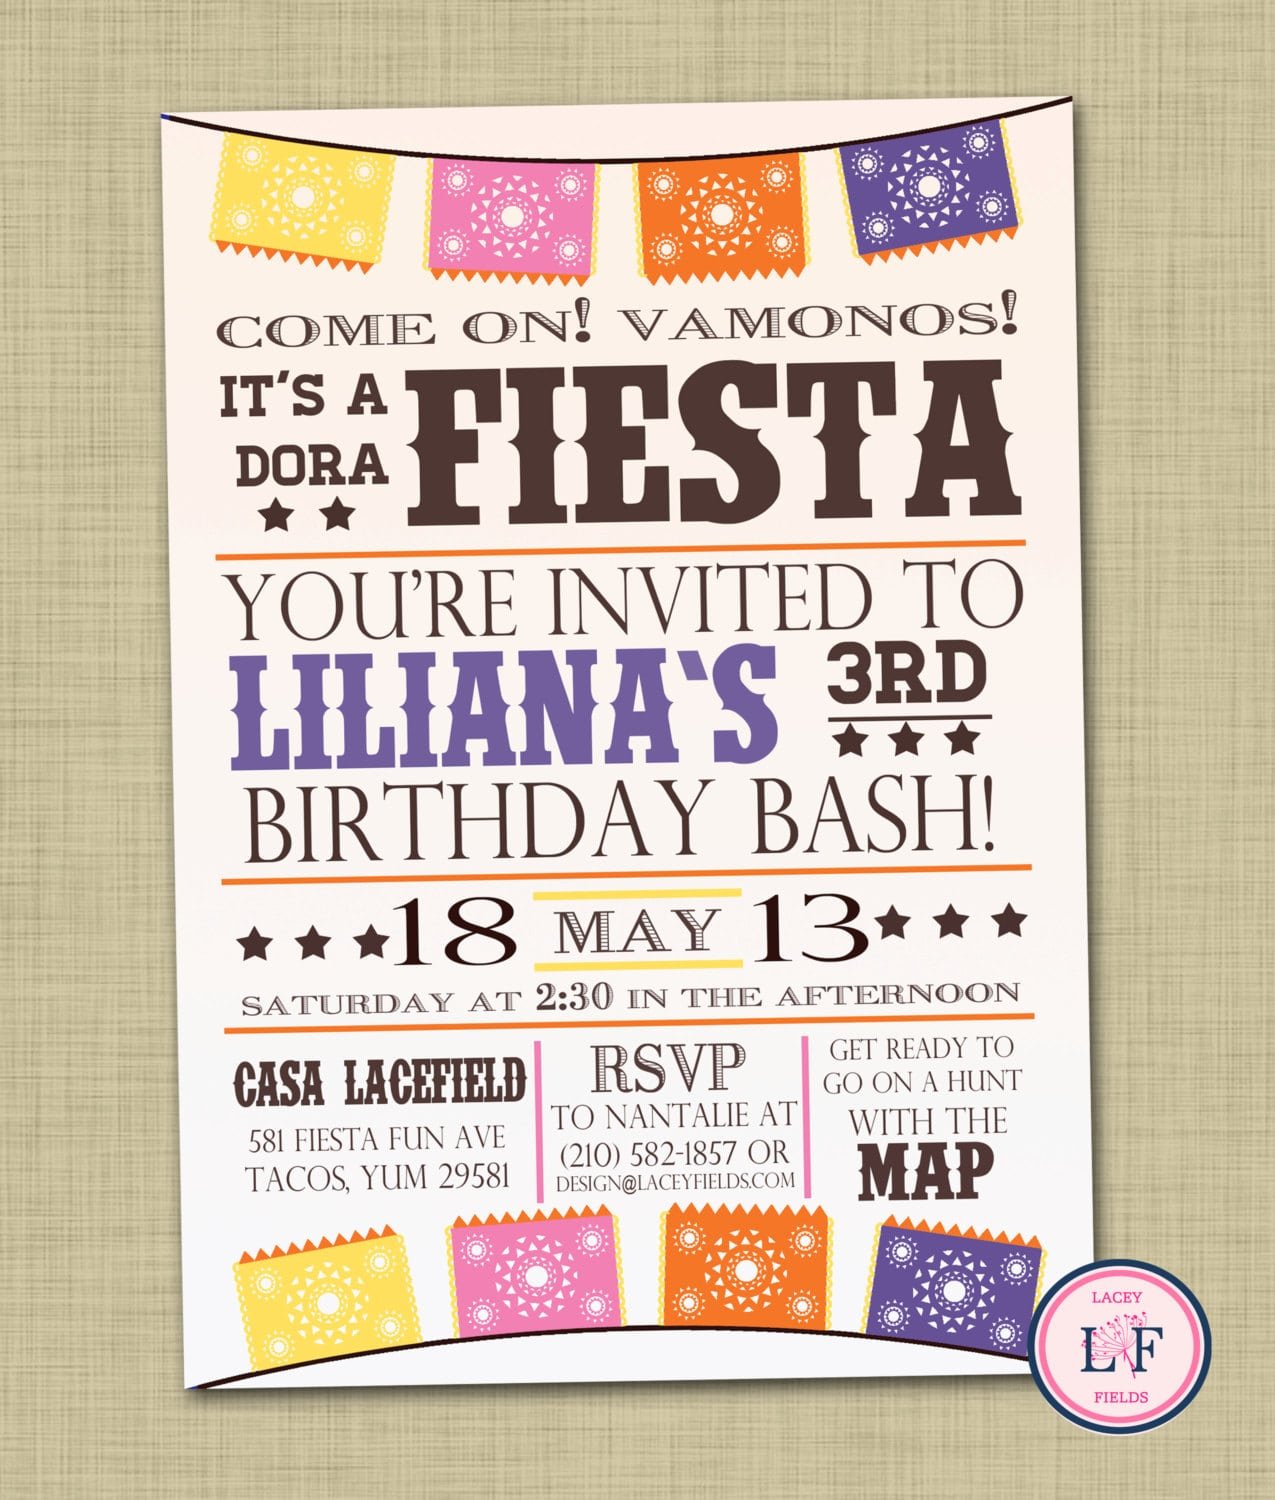 Cool Birthday Party Invitations Ideas About Cool Birthday Party